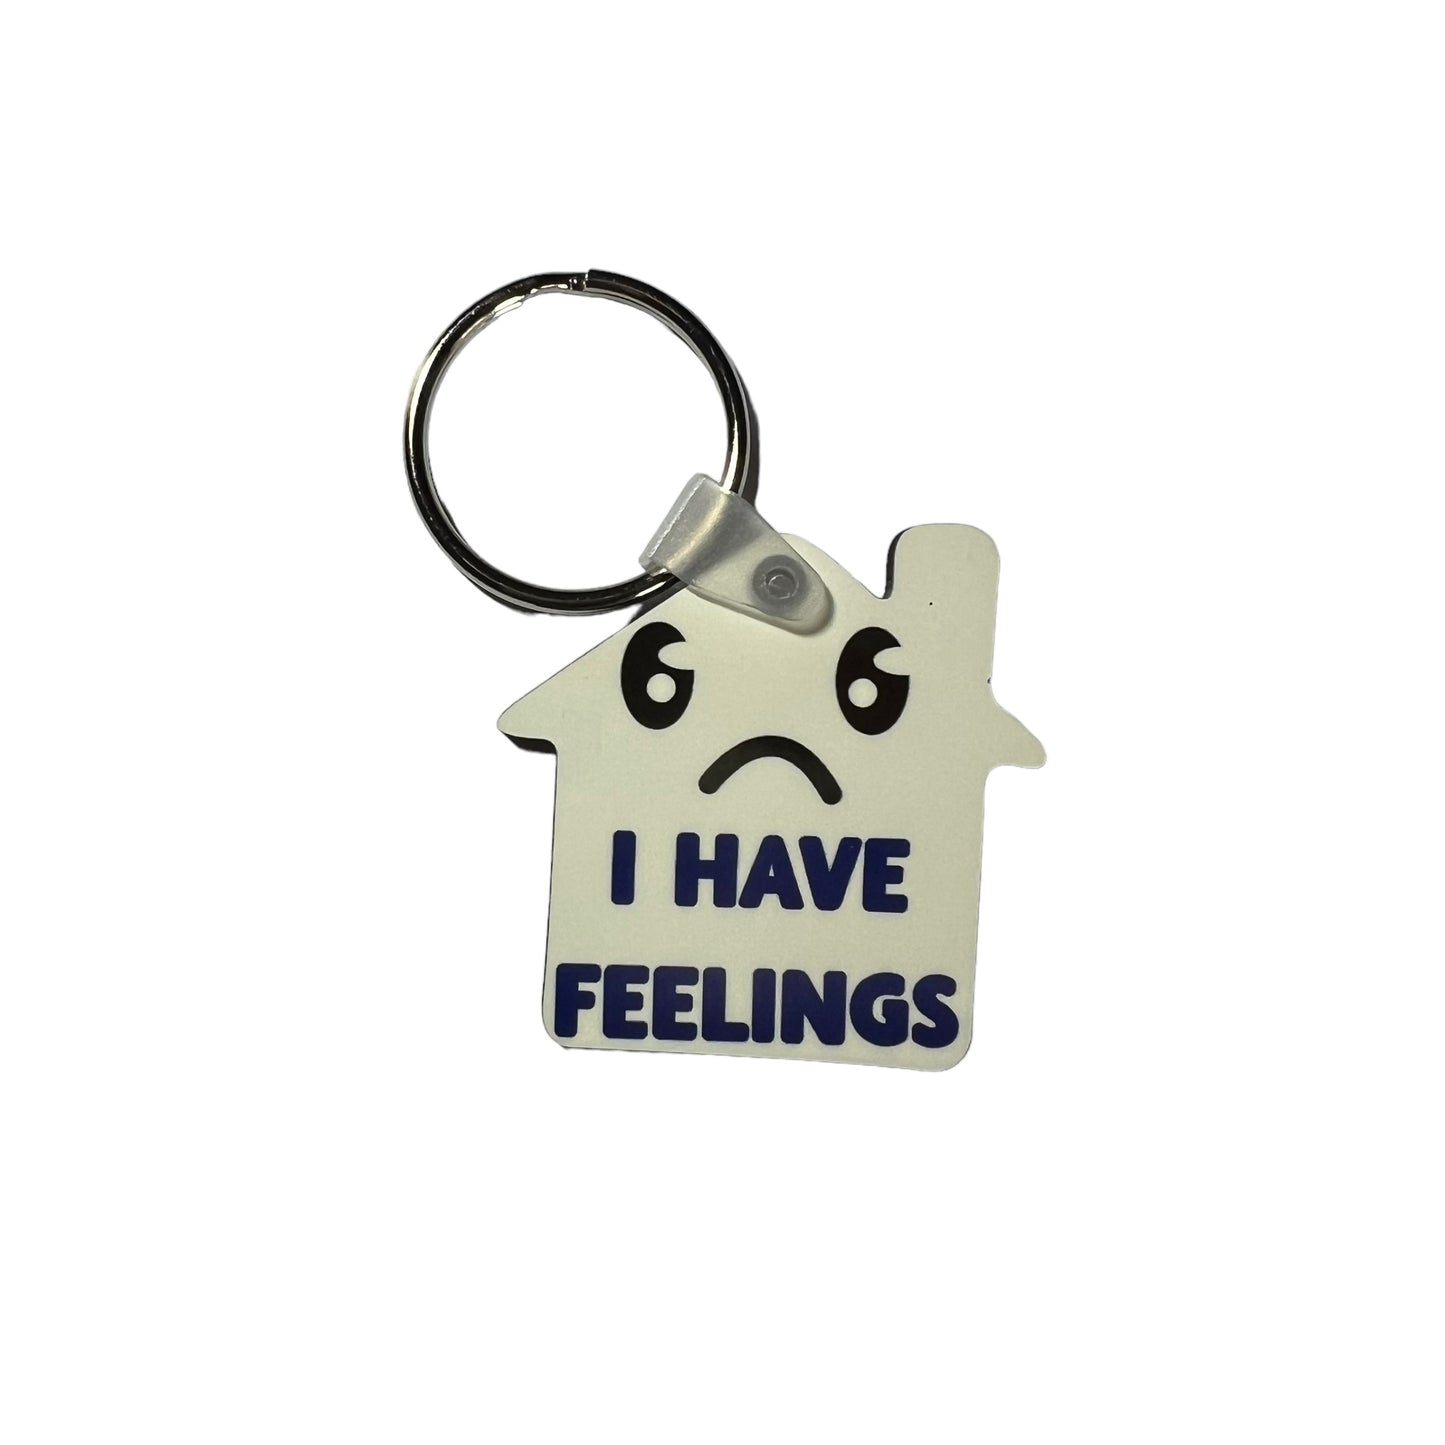 JenDore "Don't Lose Me / I Have Feelings - Your Keys" Novelty Funny Keychain